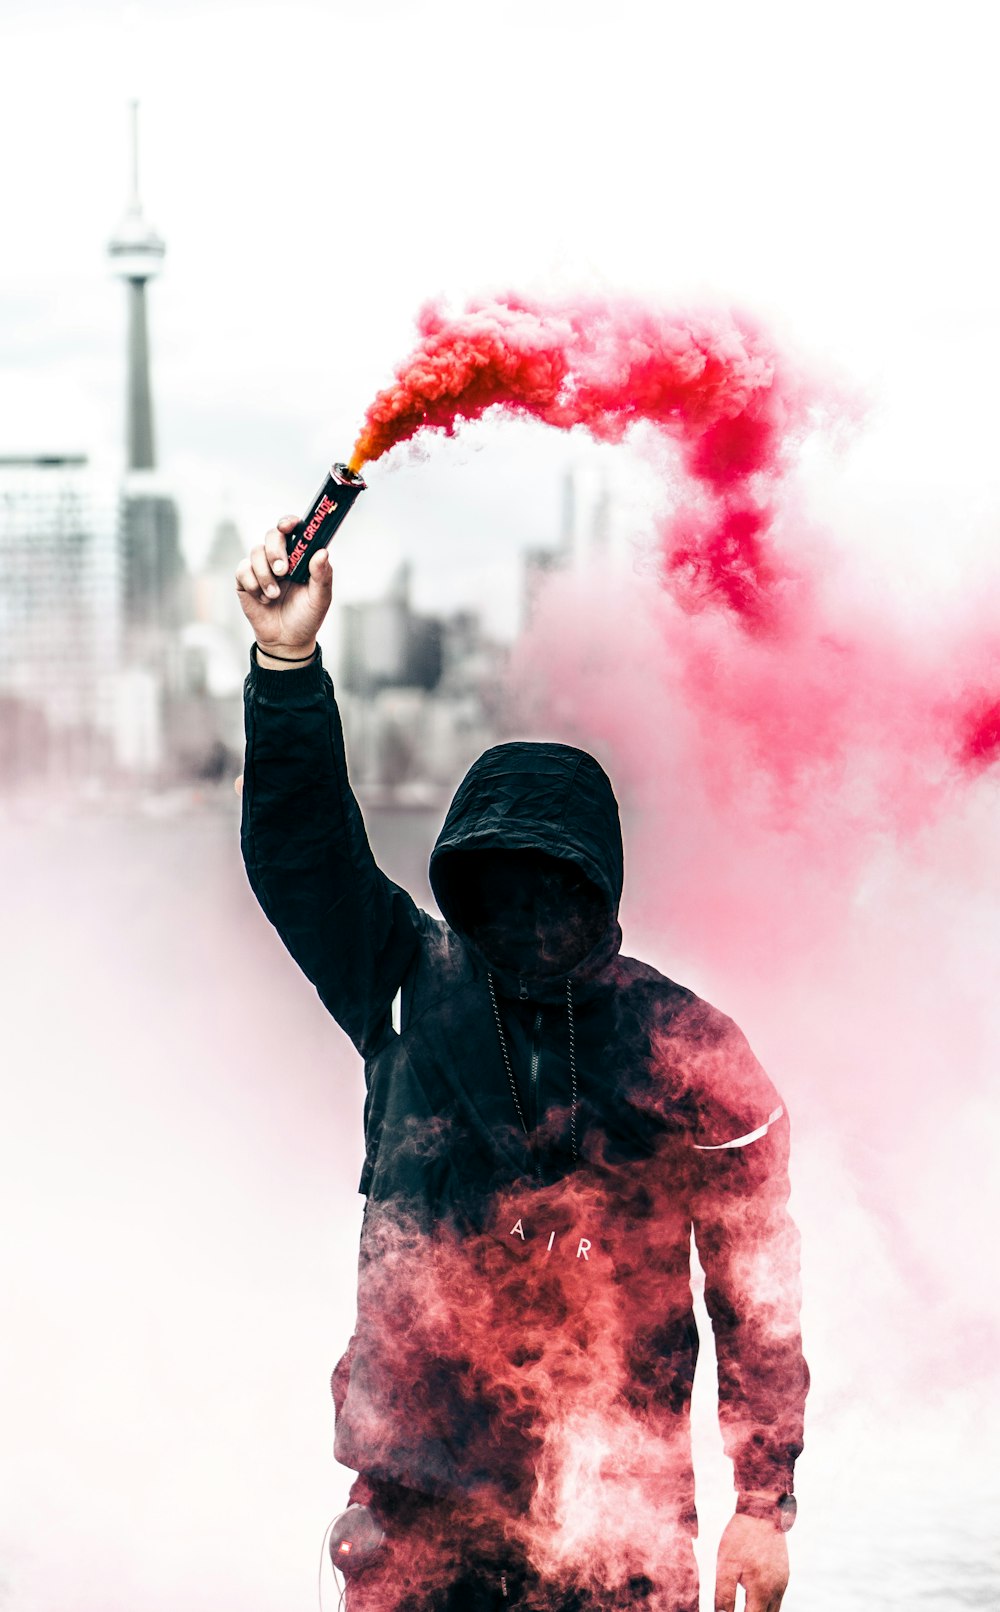 person wearing black and red hoodie holding smoke bomb